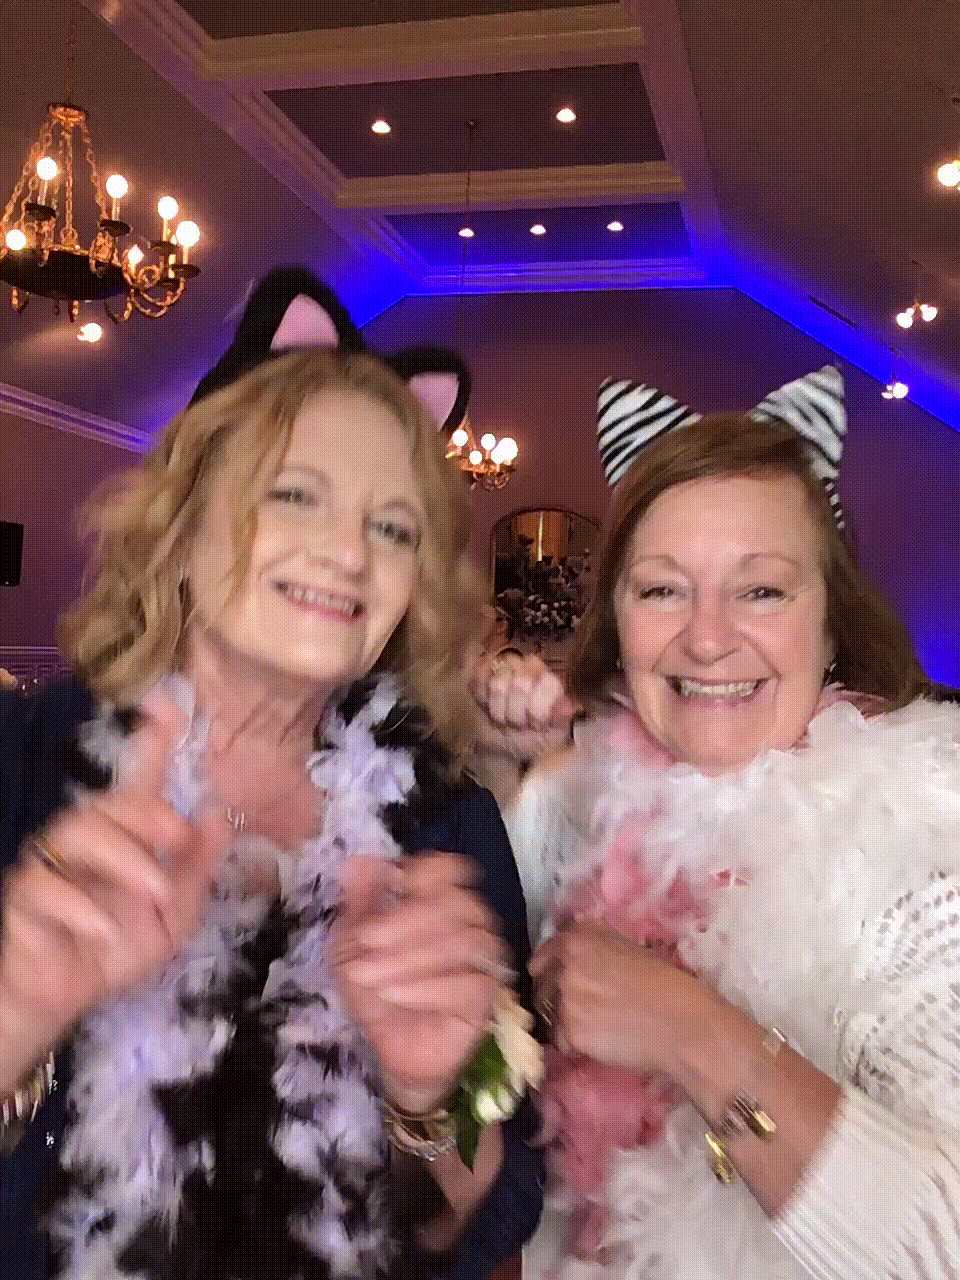 GIF of Women dancing with Cat and boas in photobooth